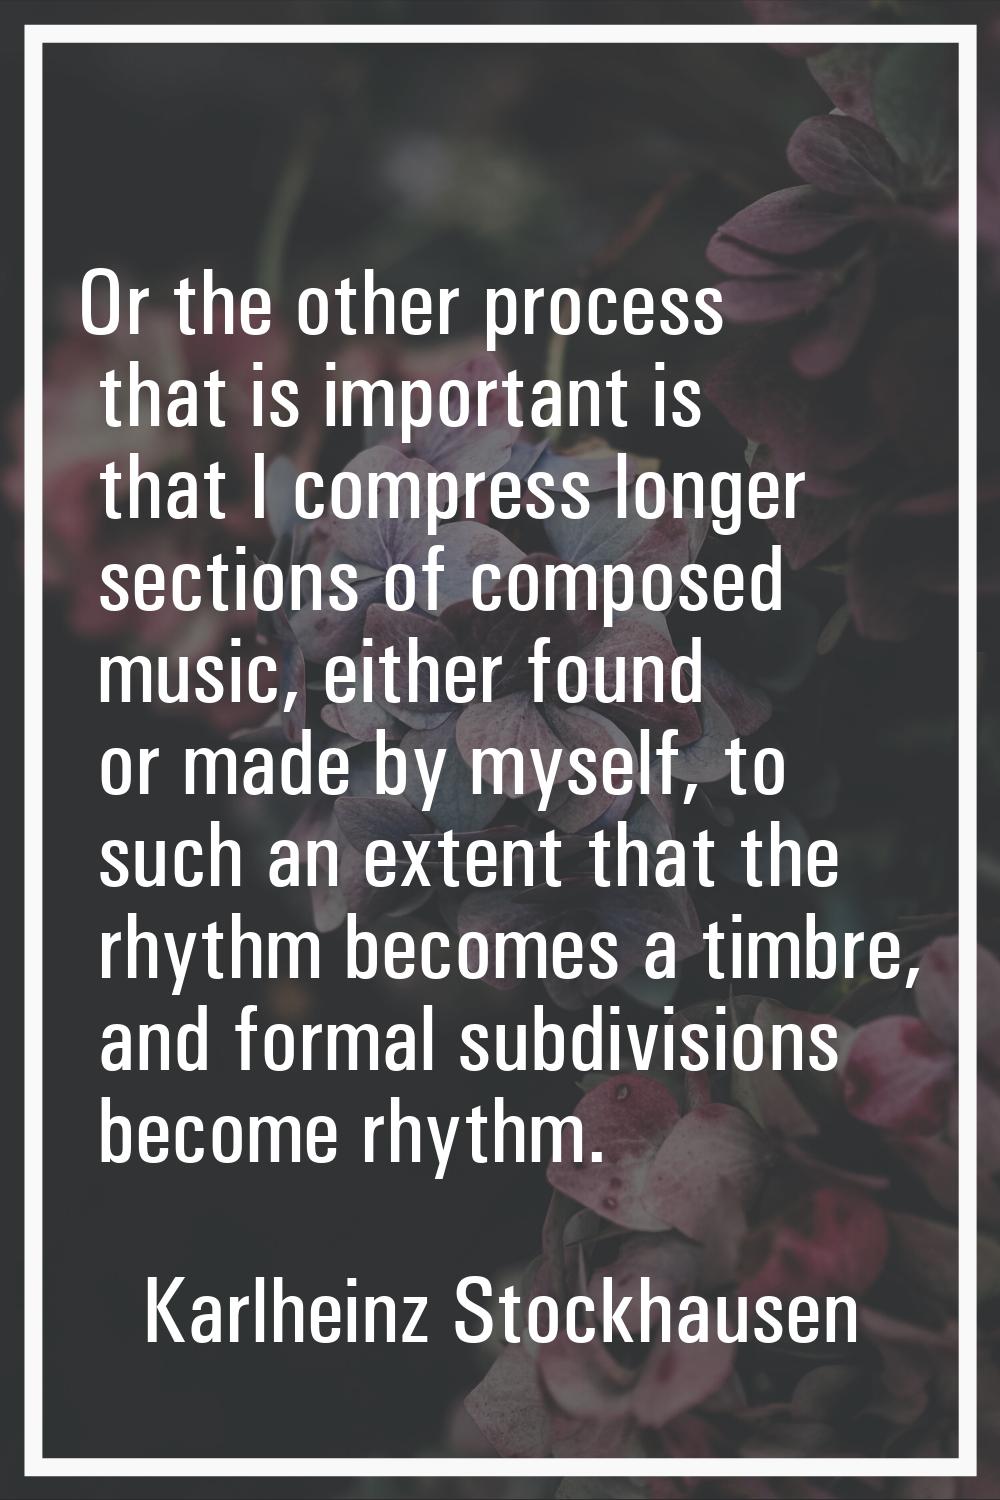 Or the other process that is important is that I compress longer sections of composed music, either